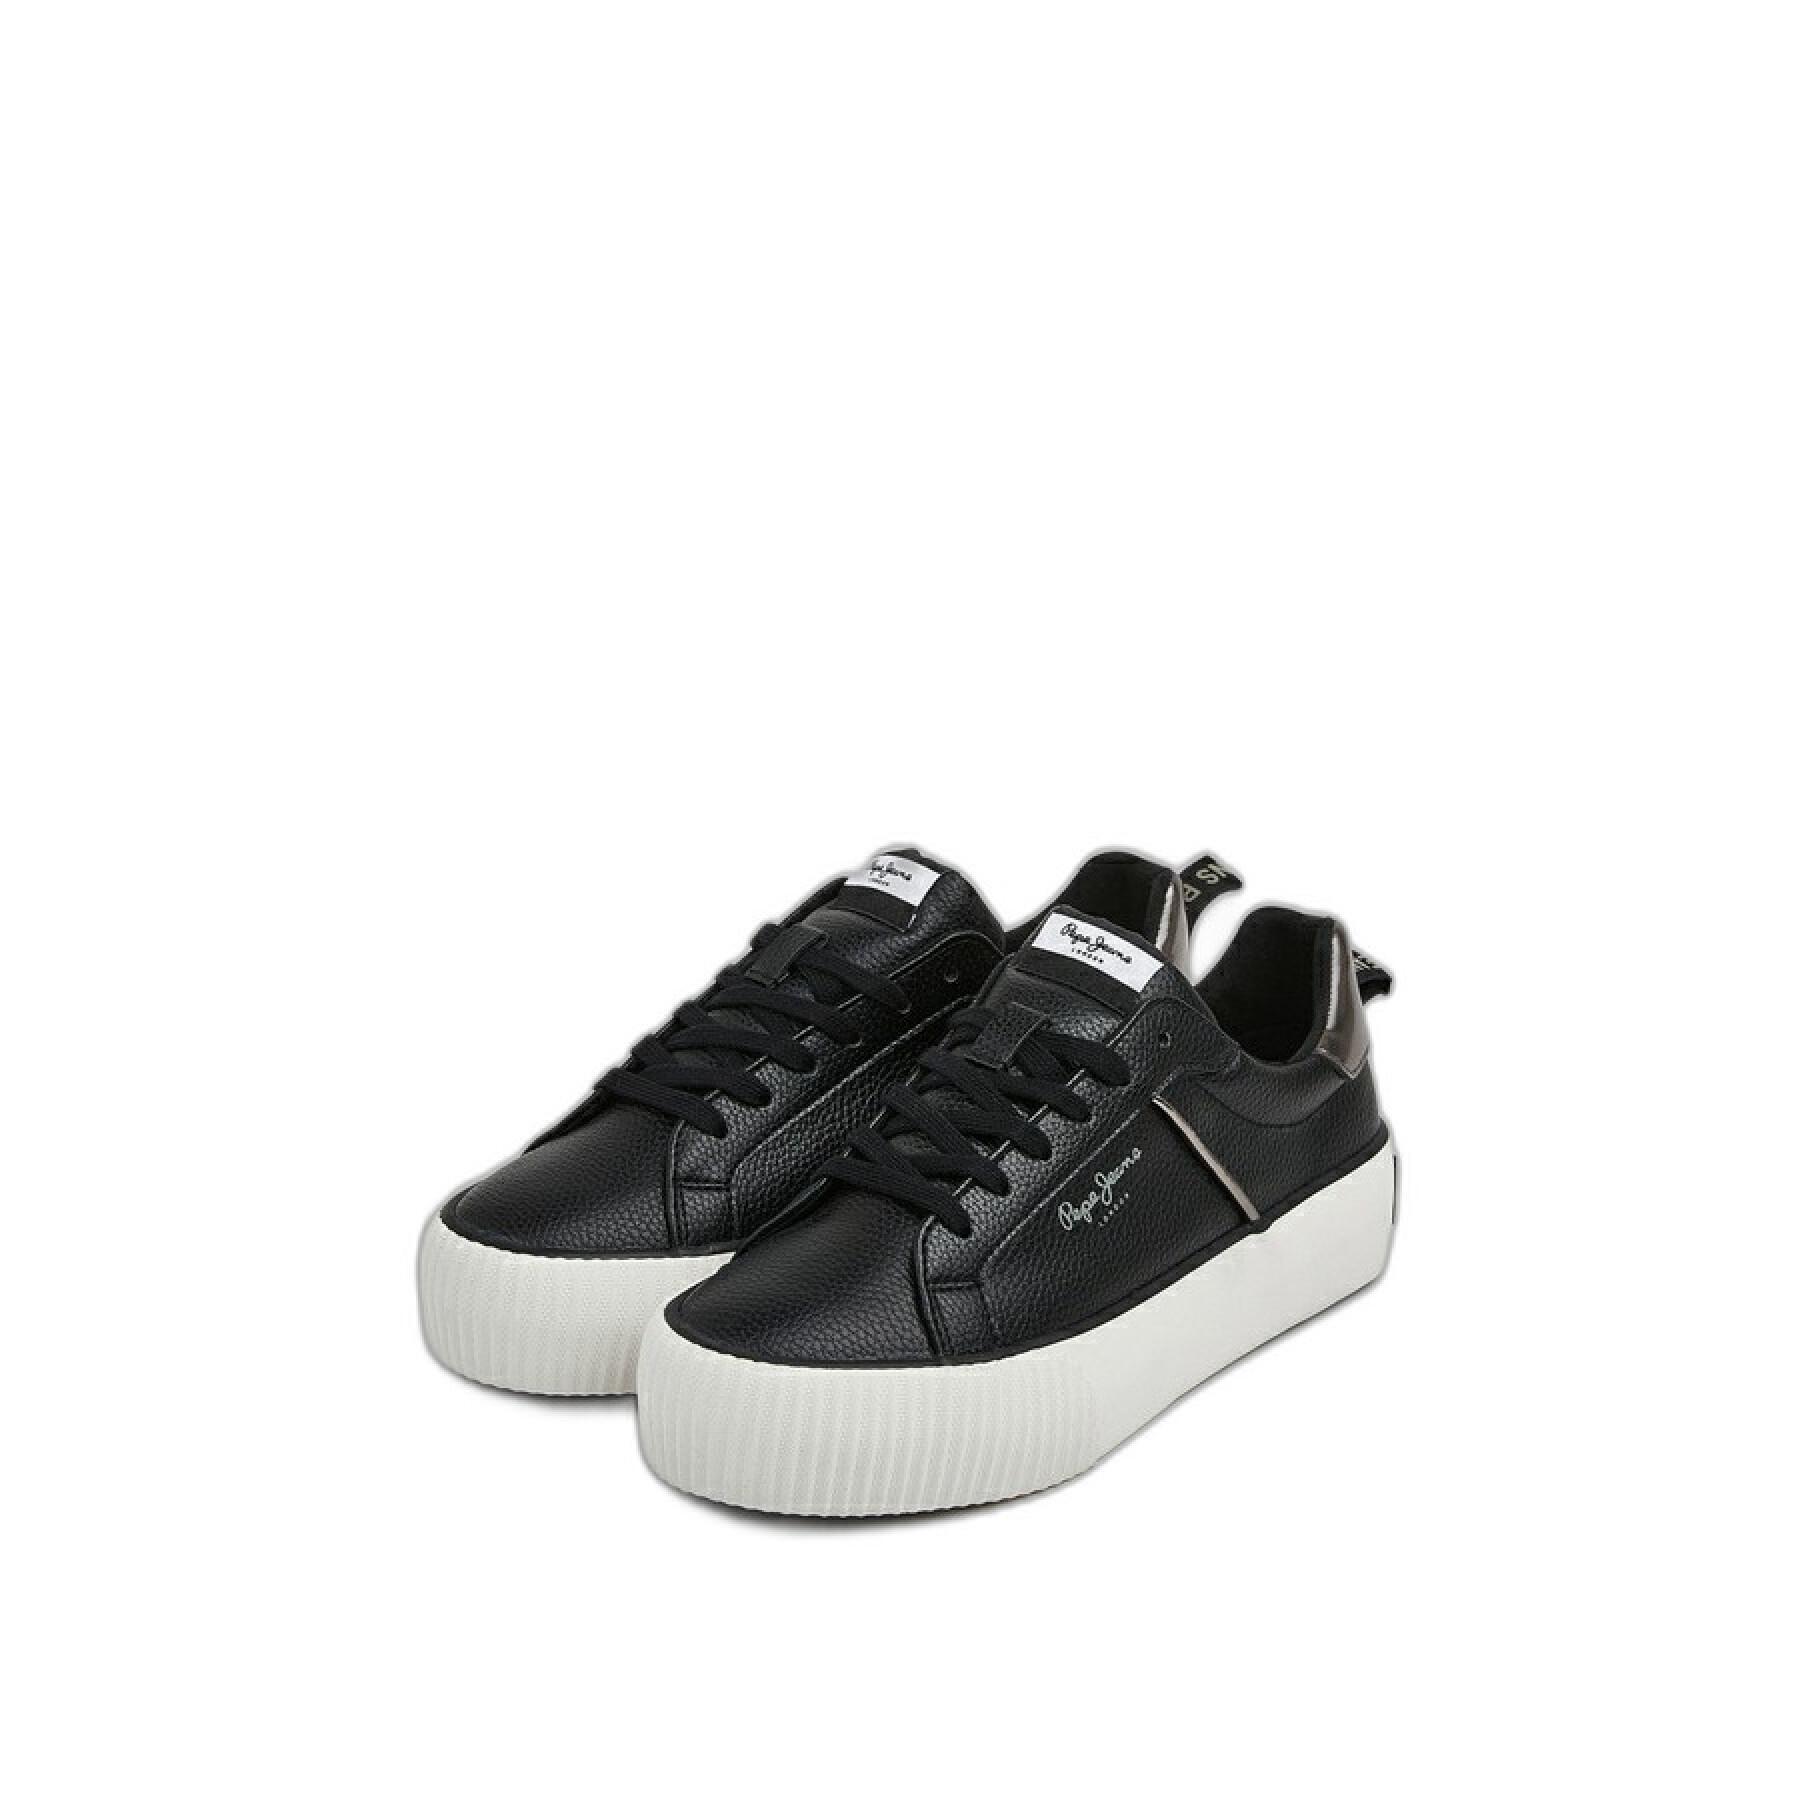 Women's sneakers Pepe Jeans Cool